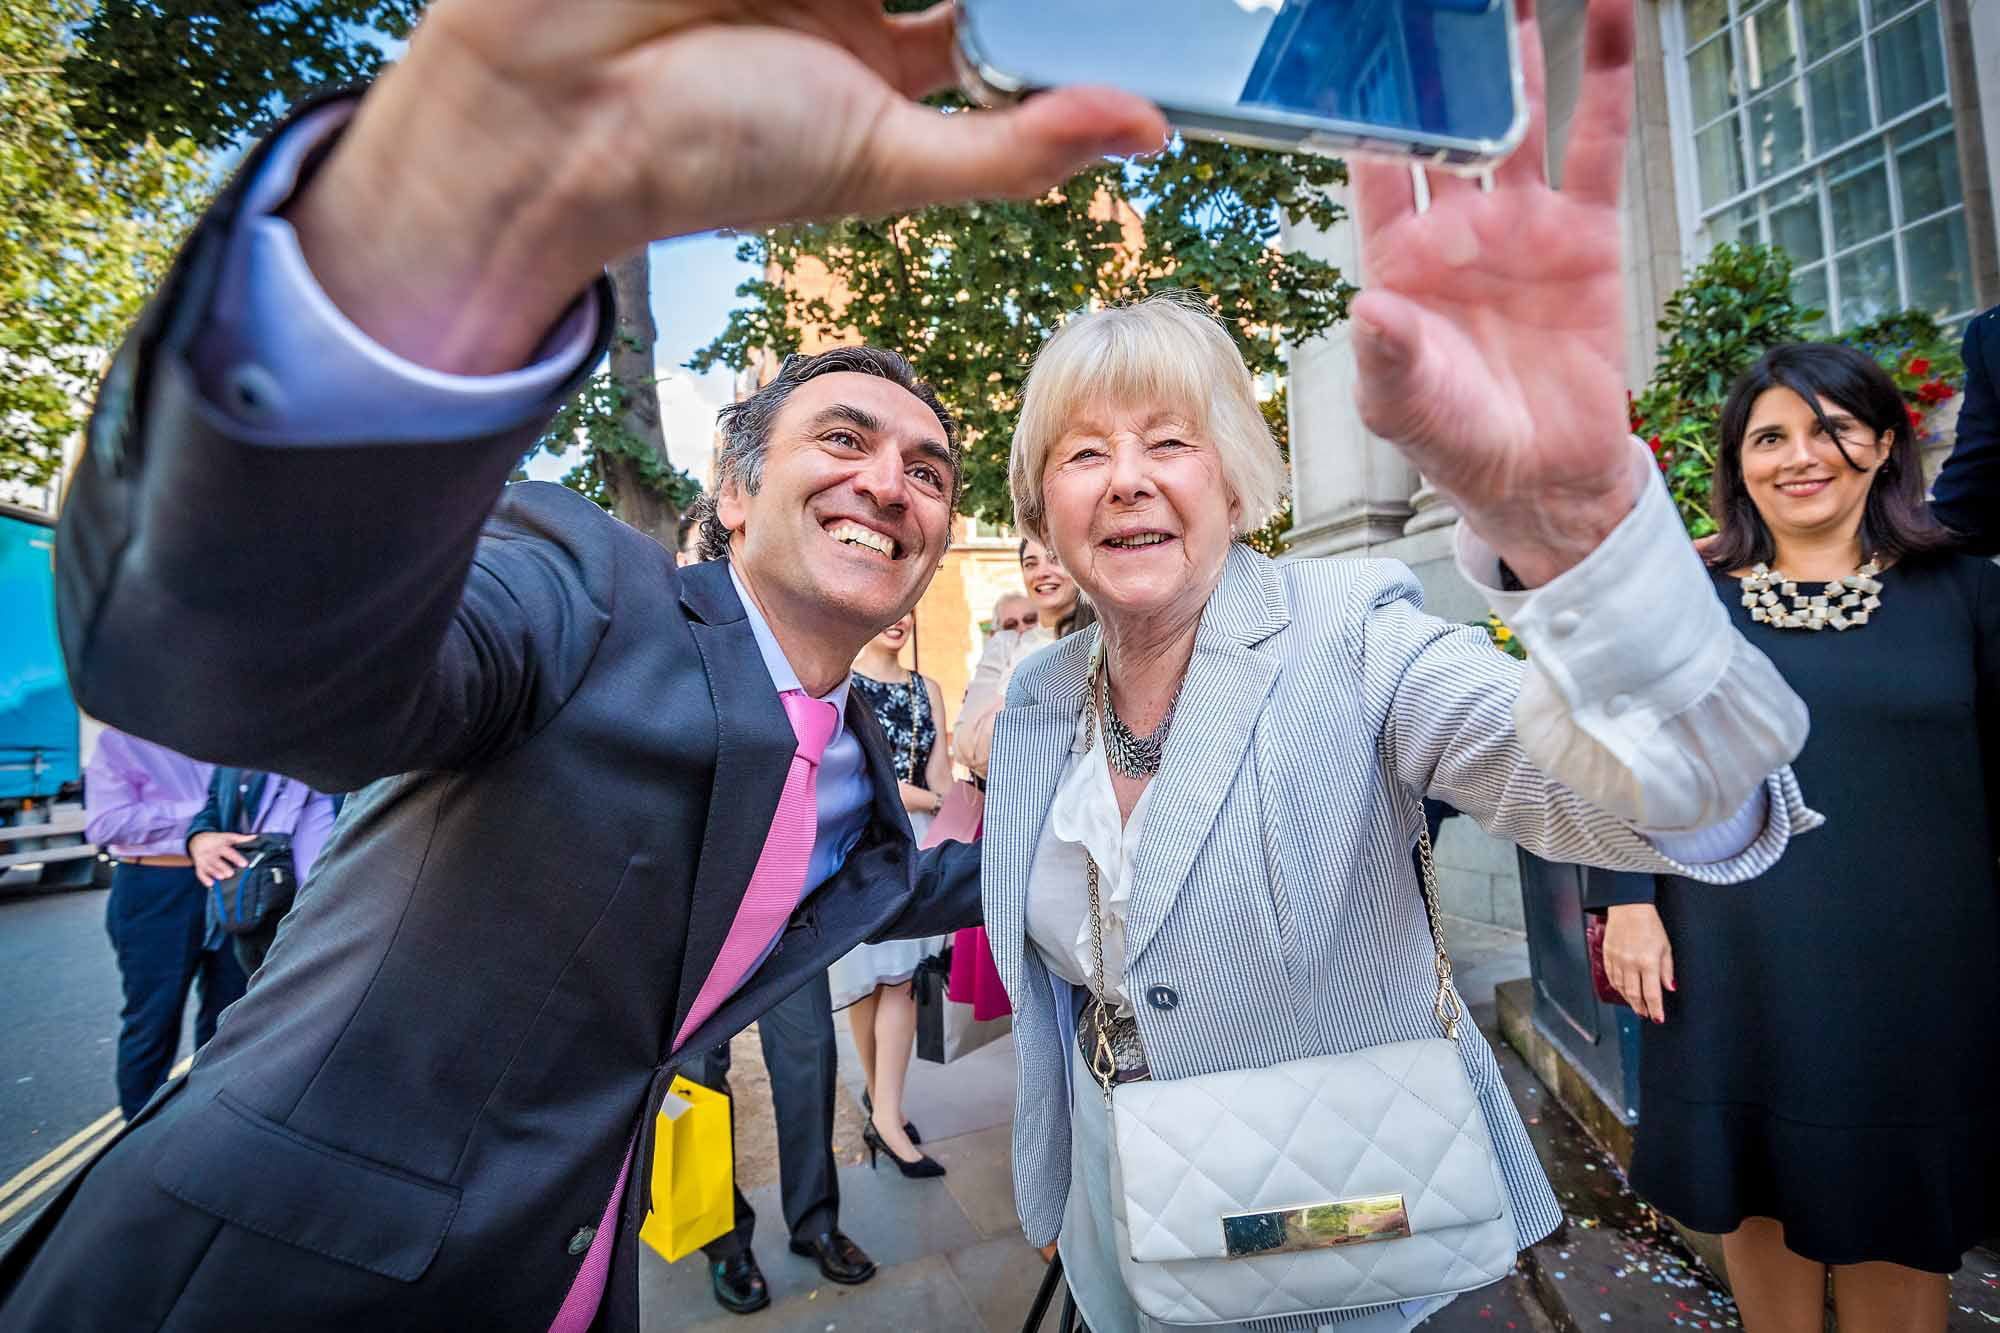 Two wedding guests taking a selfie at a wedding in London